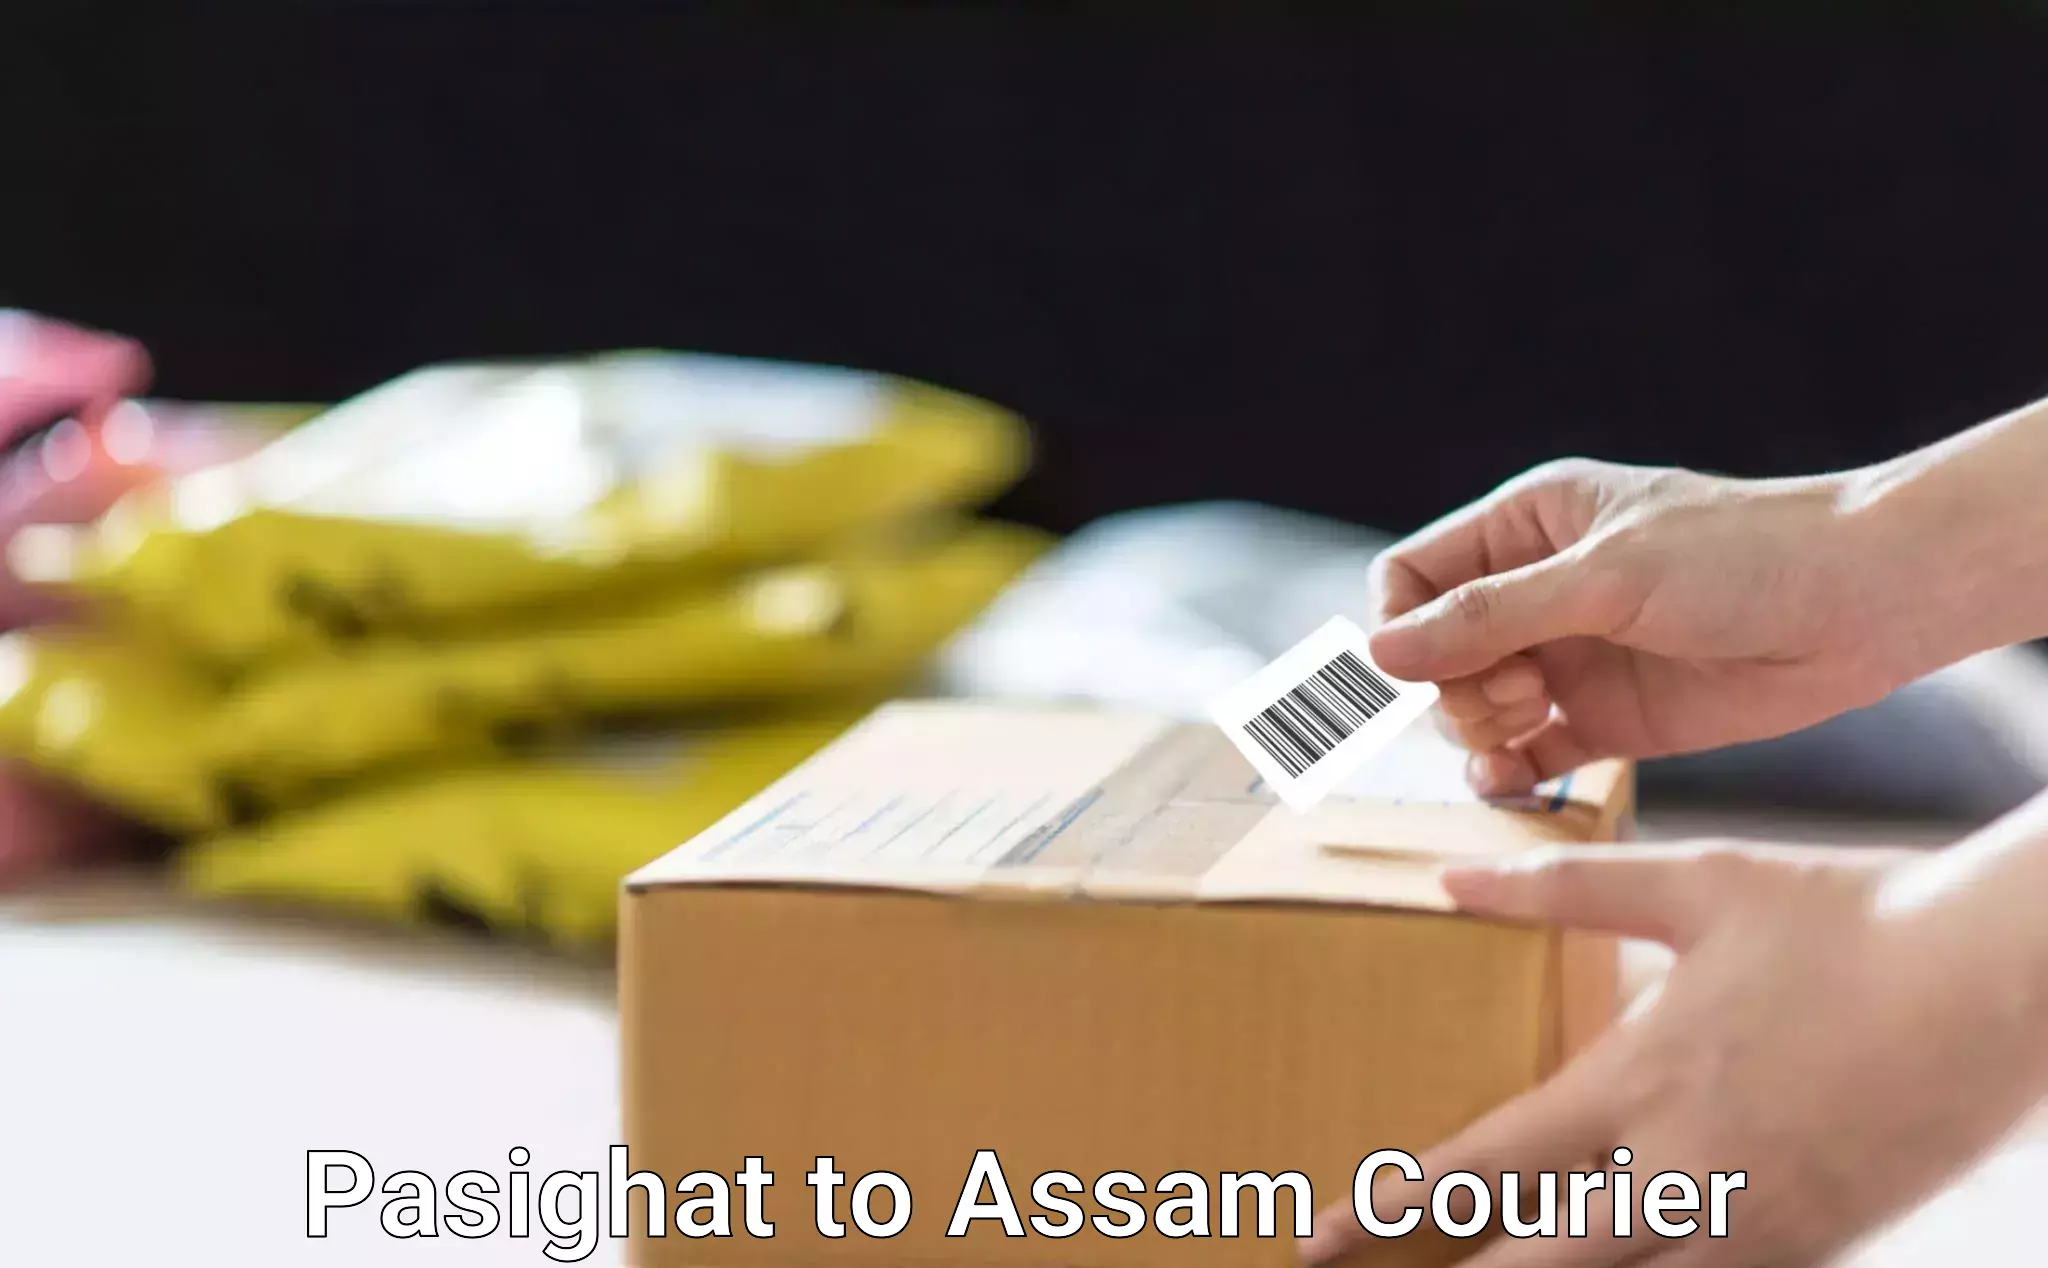 Same-day delivery options in Pasighat to Silapathar